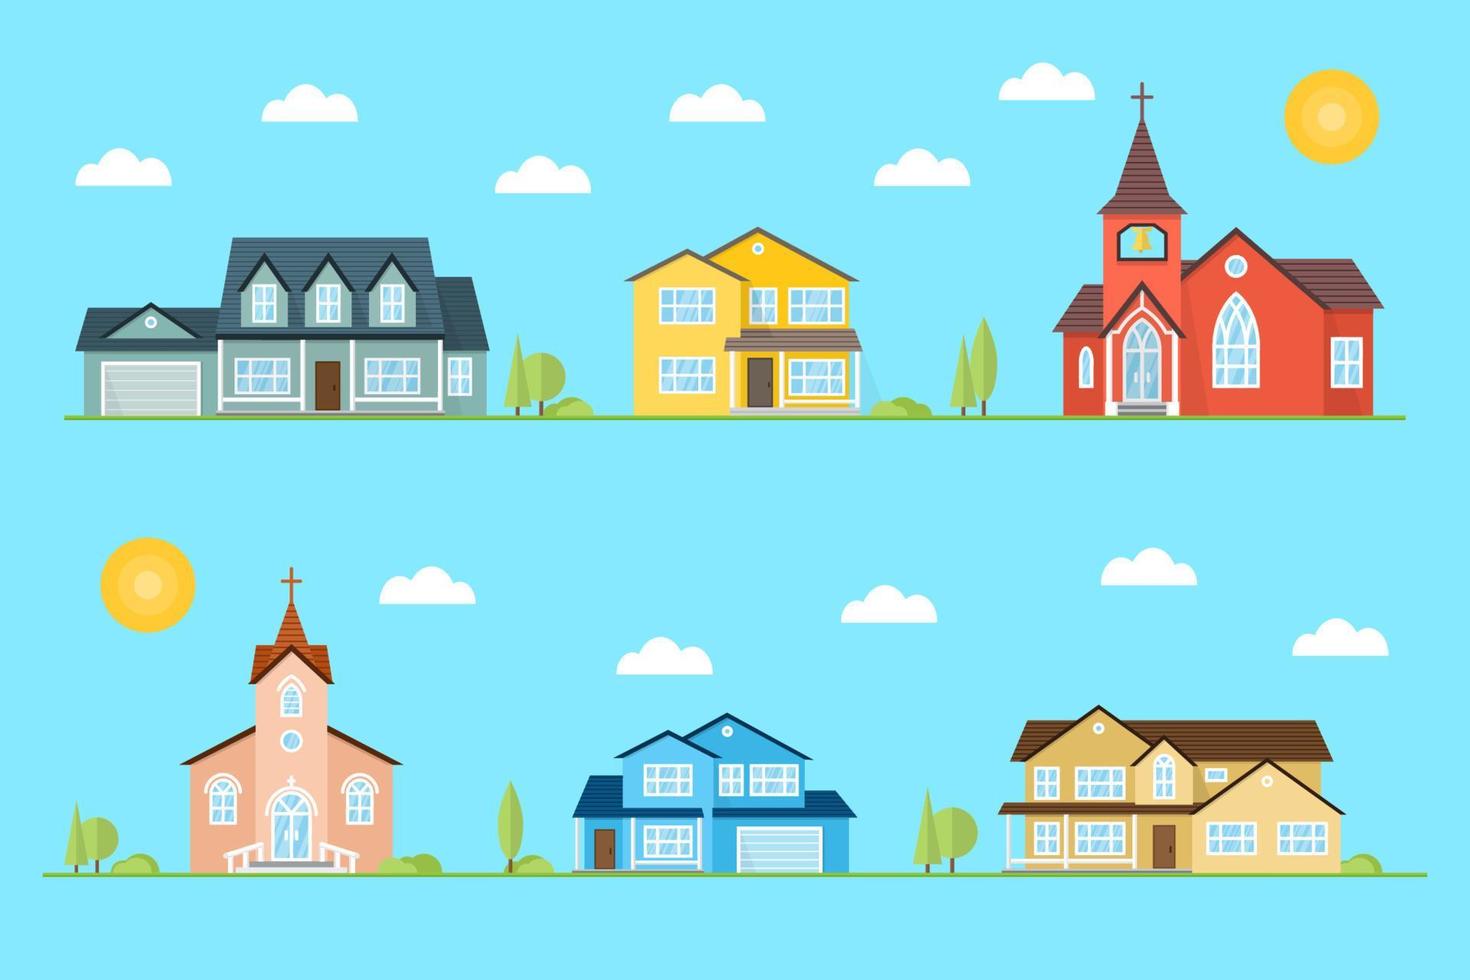 Neighborhood with homes and churches illustrated on the blue background. vector